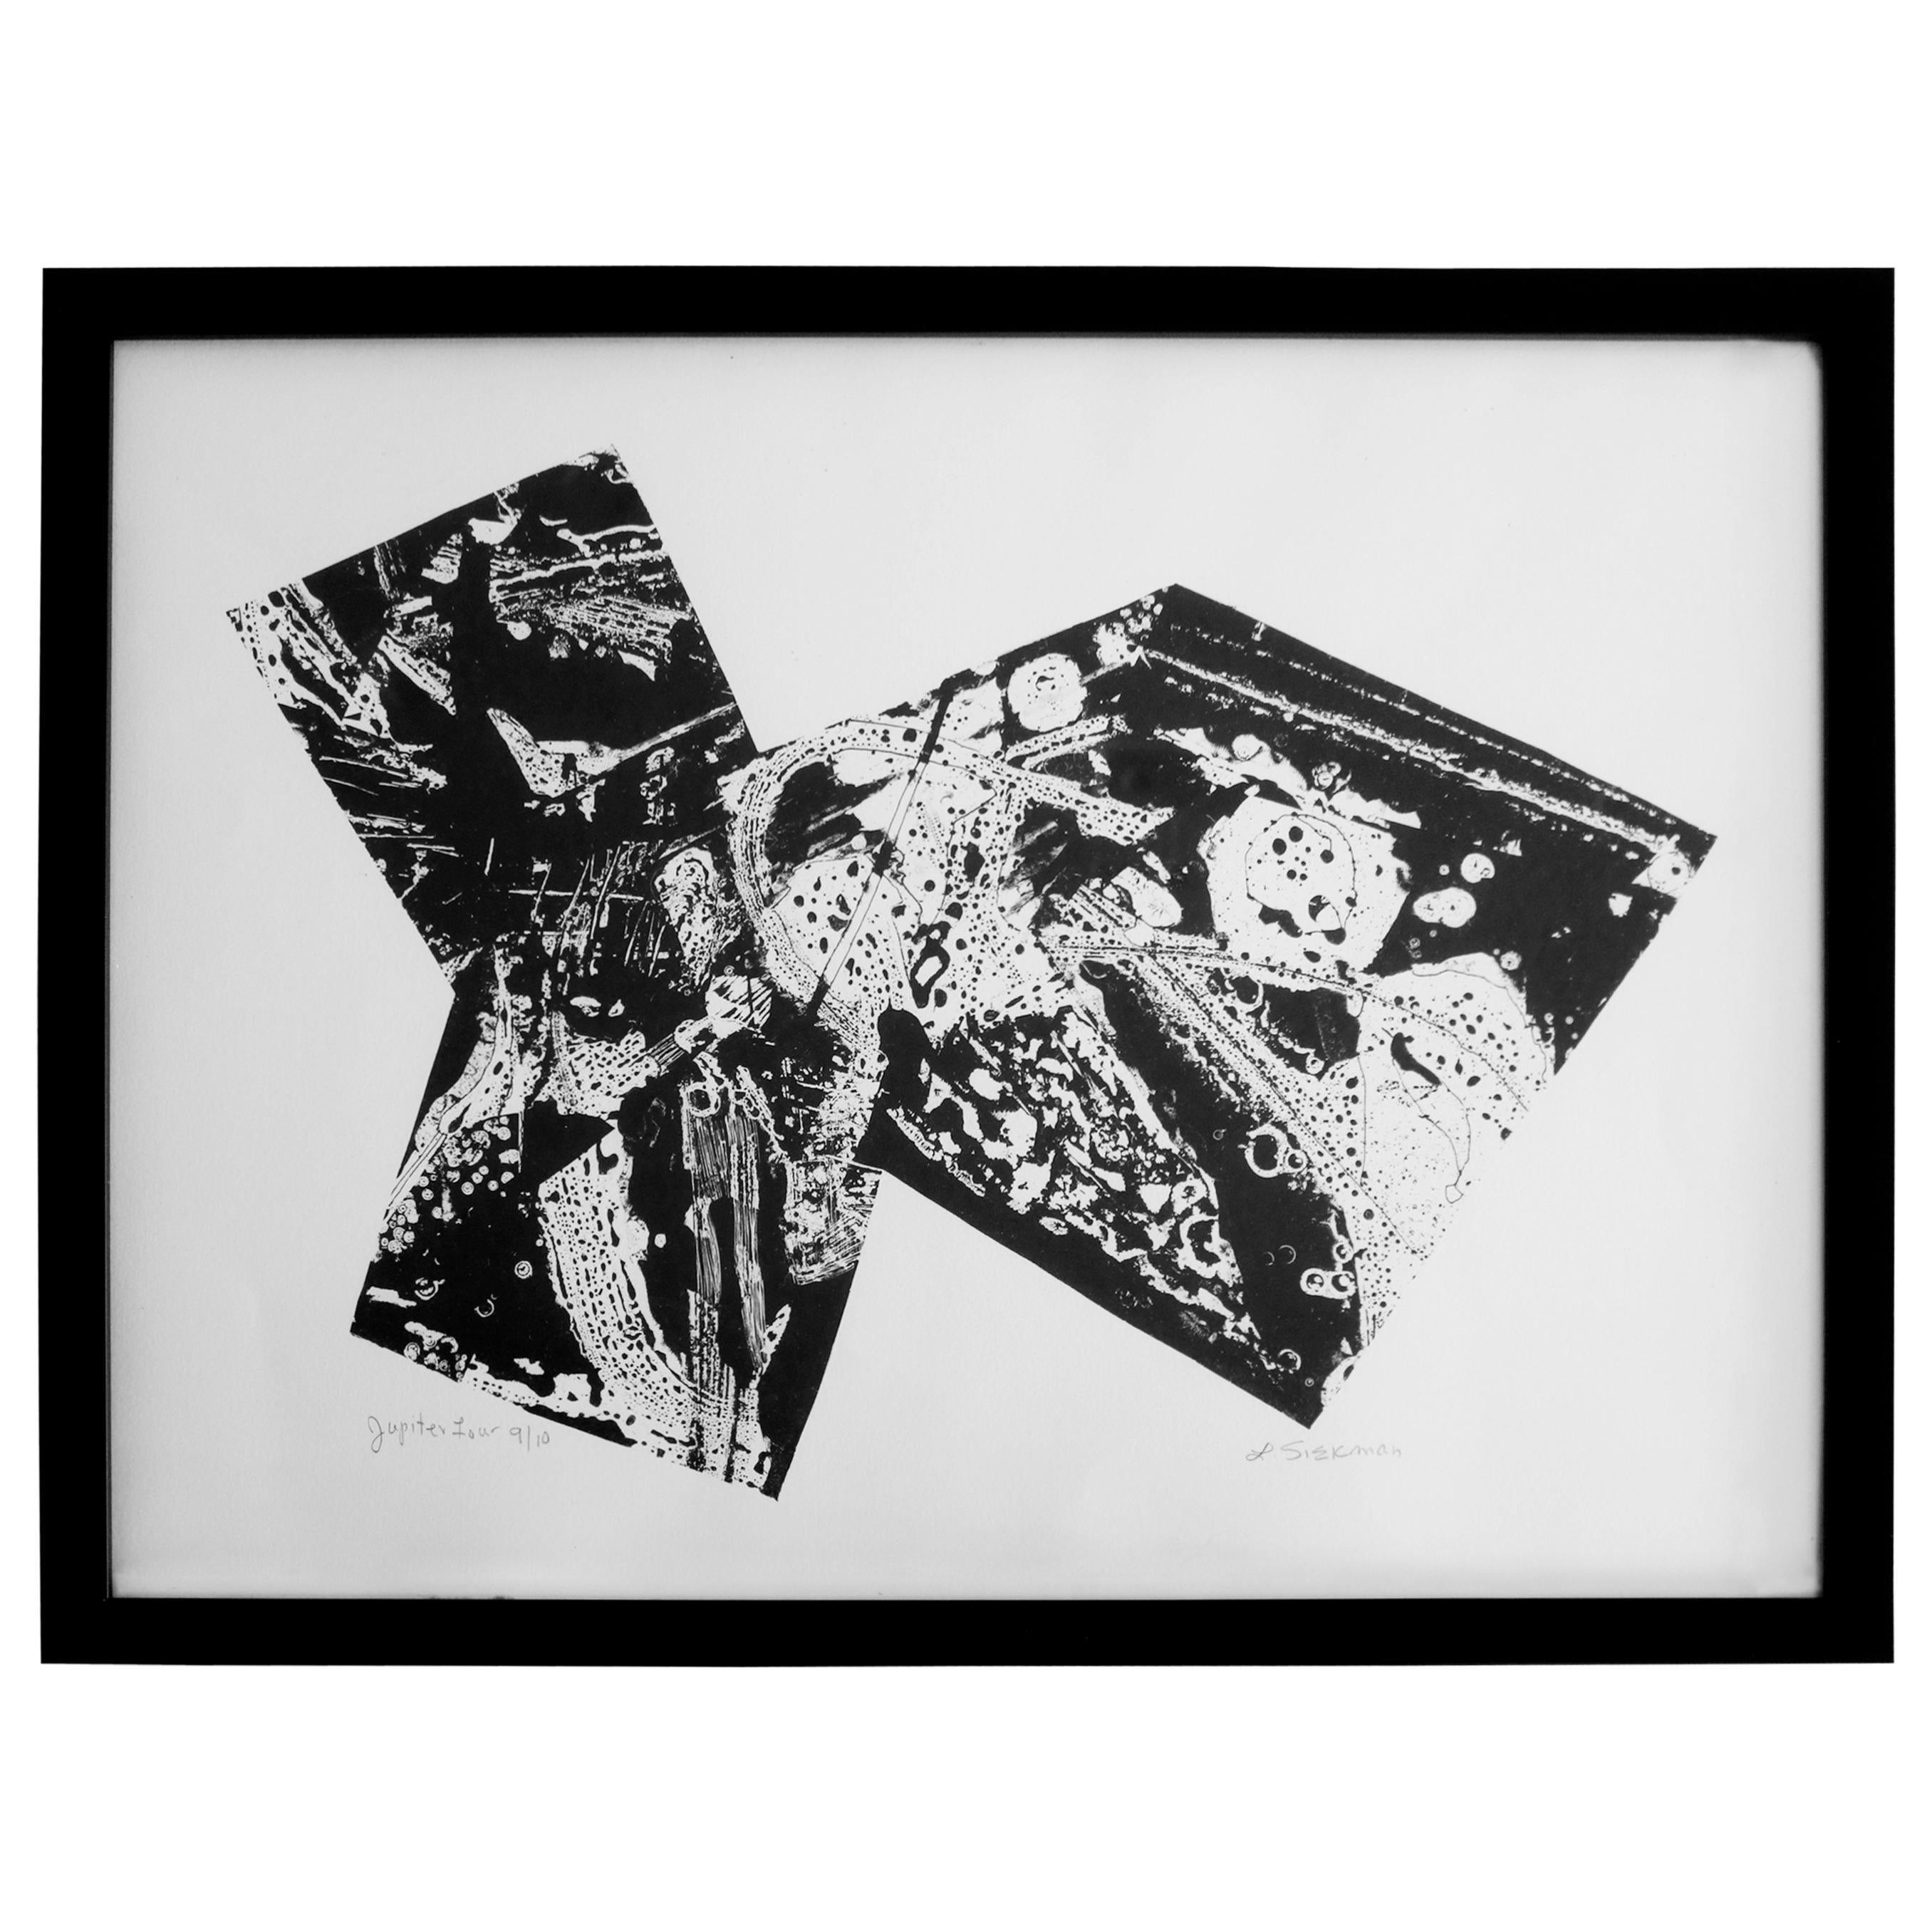 "Jupiter Four 9/10" Framed Lithograph by Louise Siekman For Sale